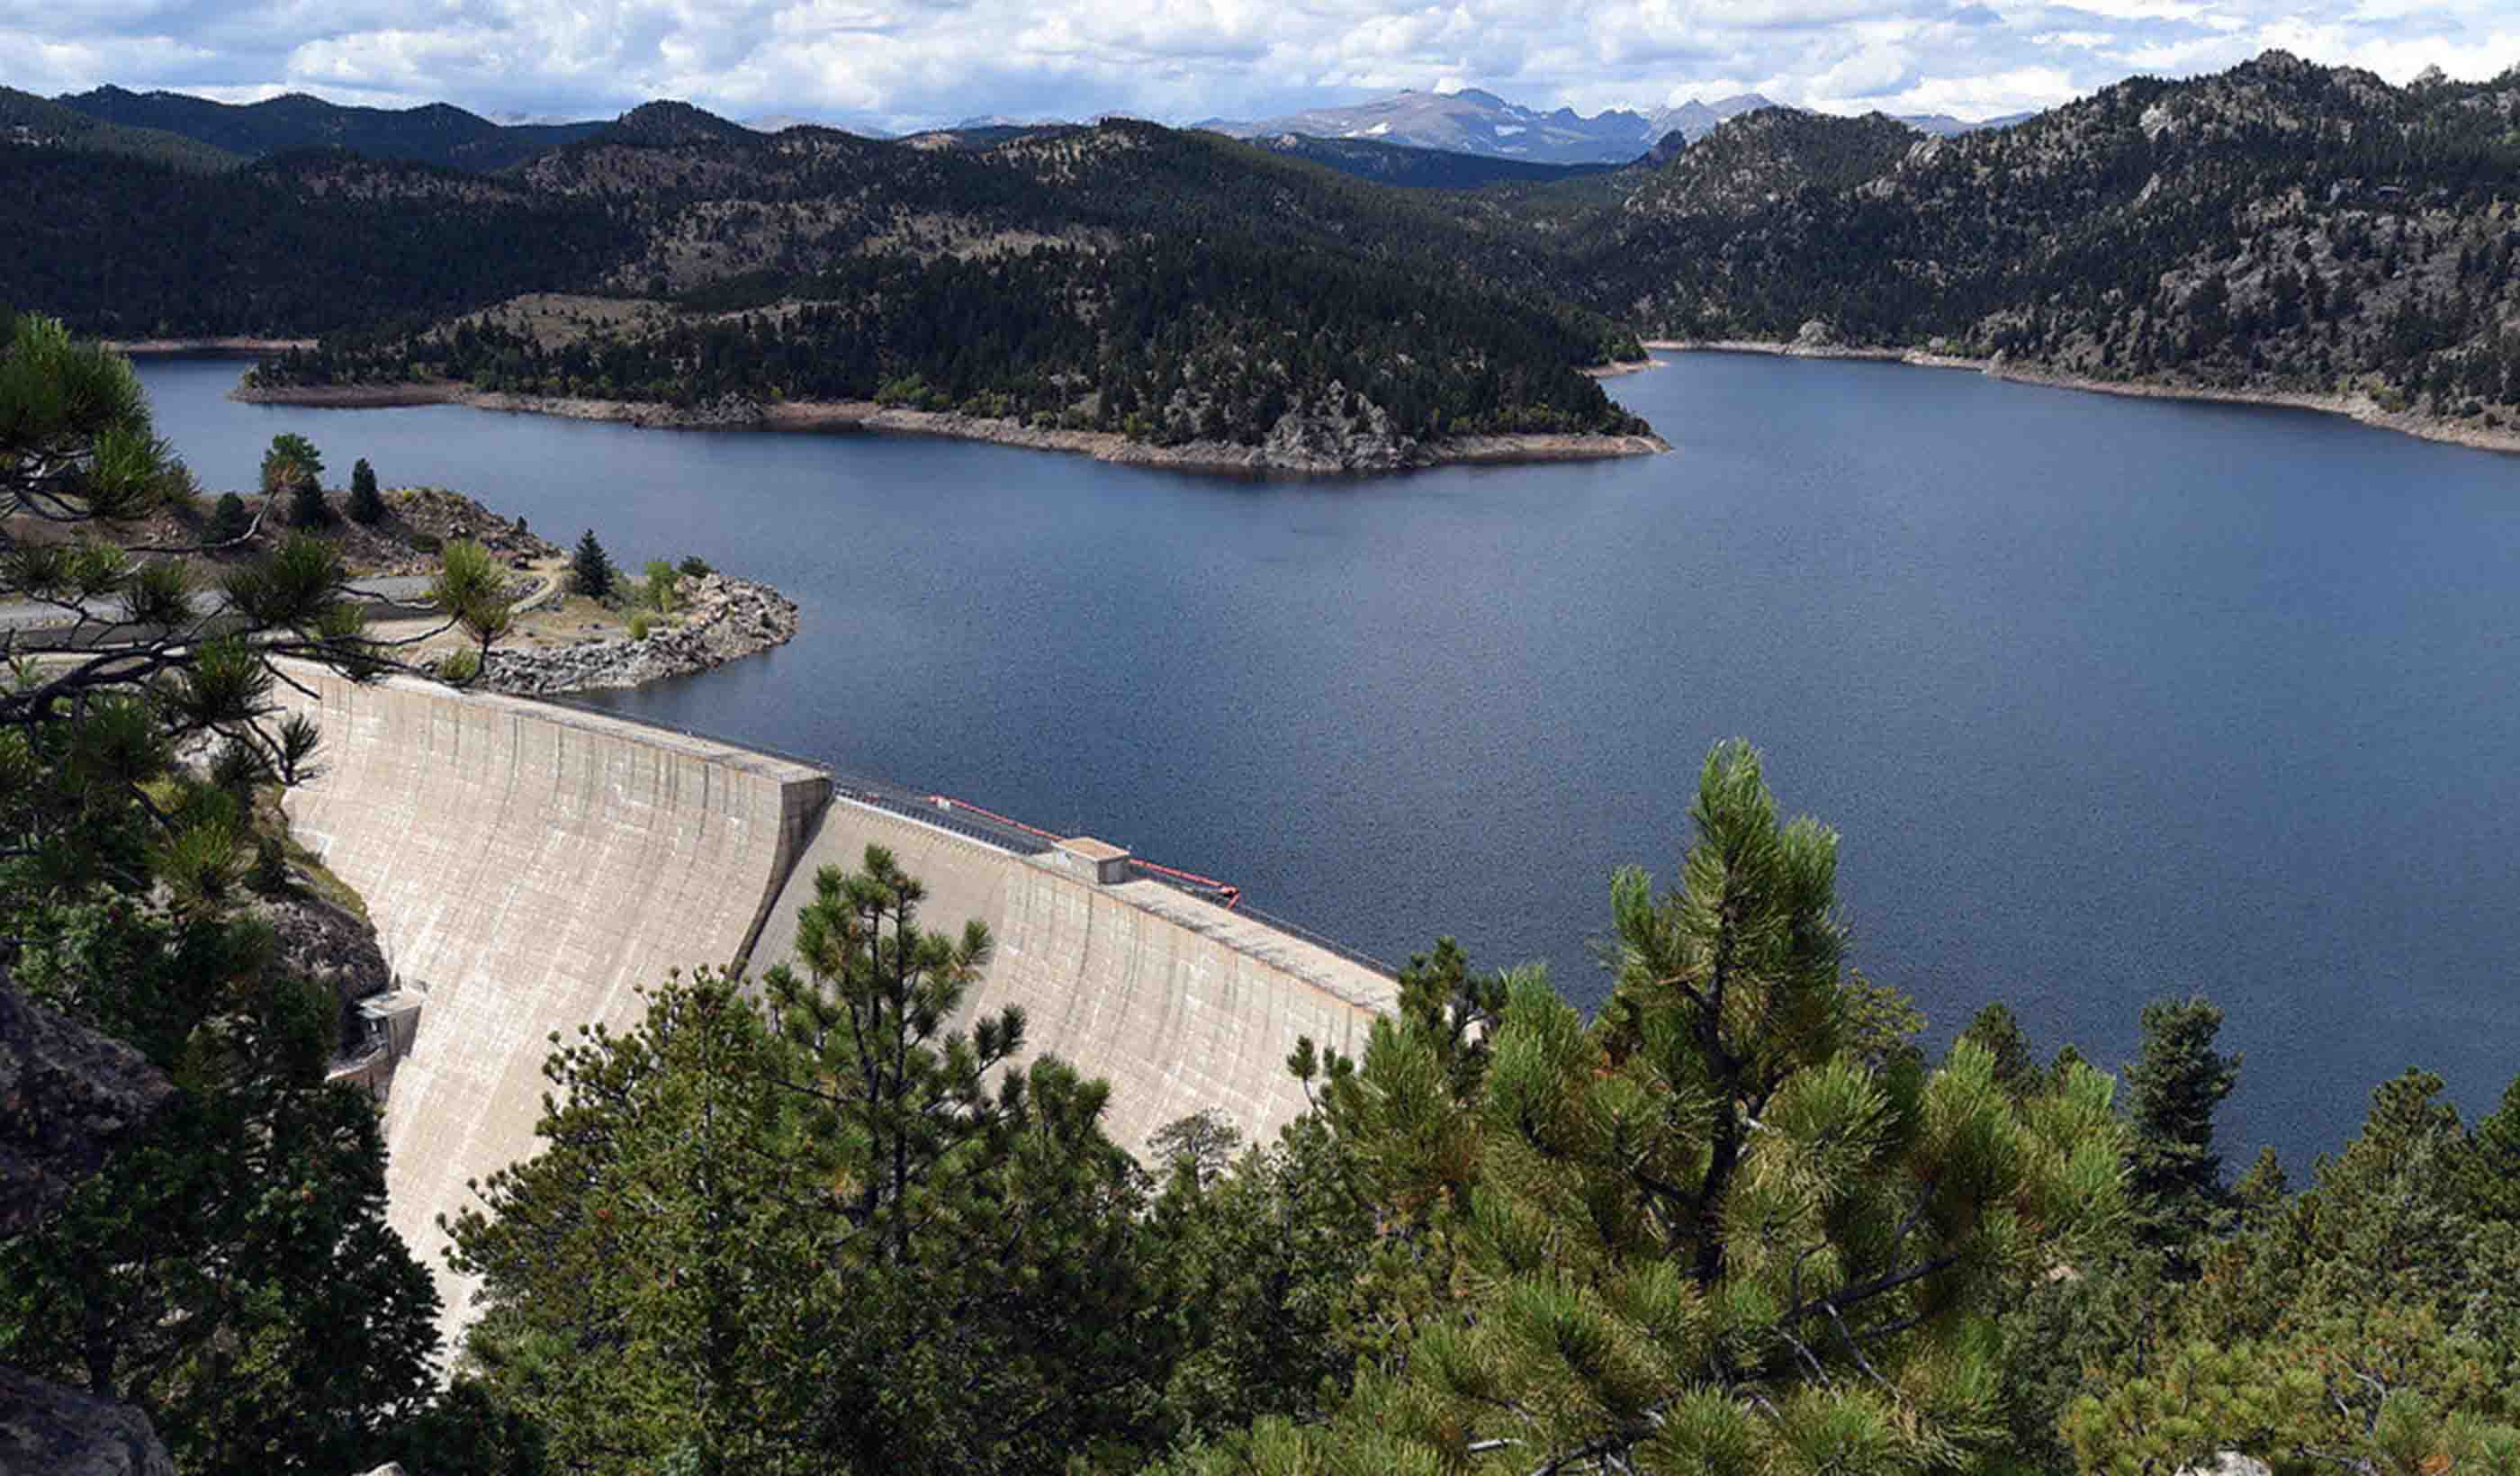 Expanding reservoirs to provide water security for communities